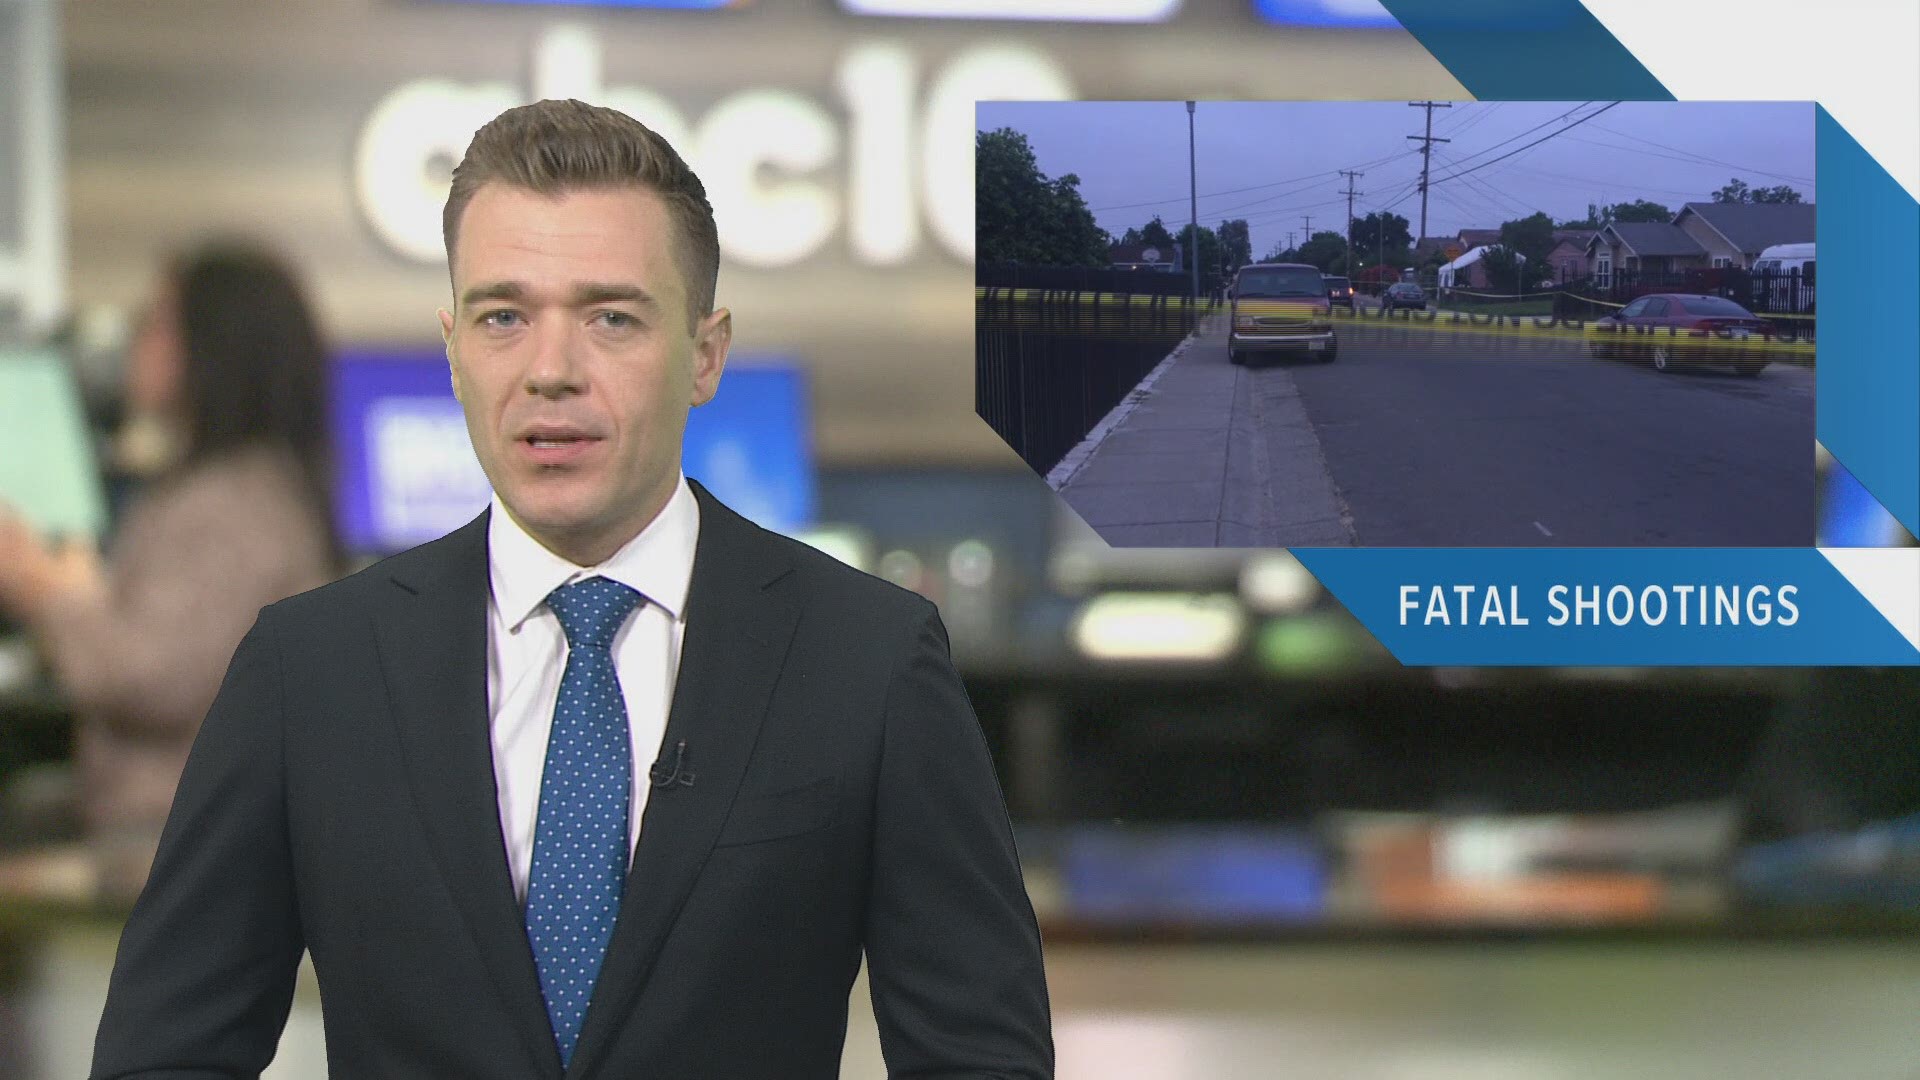 Evening Headlines: June 16, 2019 | Catch in-depth reporting on #LateNewsTonight at 11 p.m. | The latest Sacramento news is always at www.abc10.com